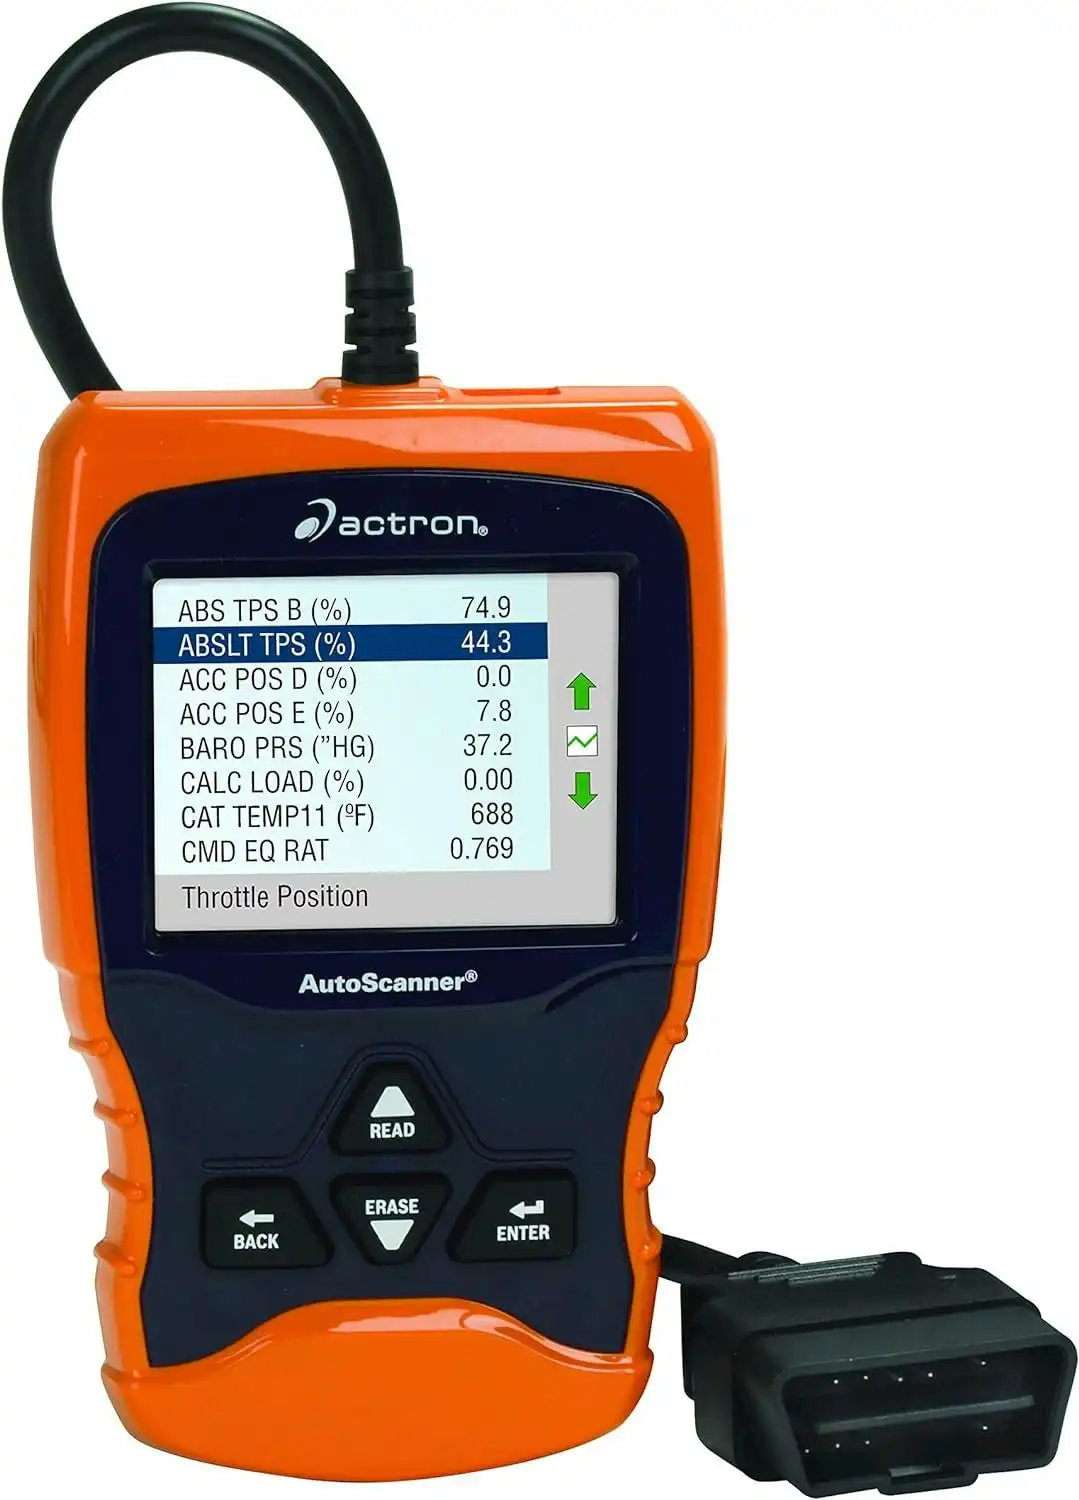 Actron CP9670 Autoscanner Trilingual OBD II, CAN, and ABS Scan Tool with Color Screen for 1996 and Newer Vehicles